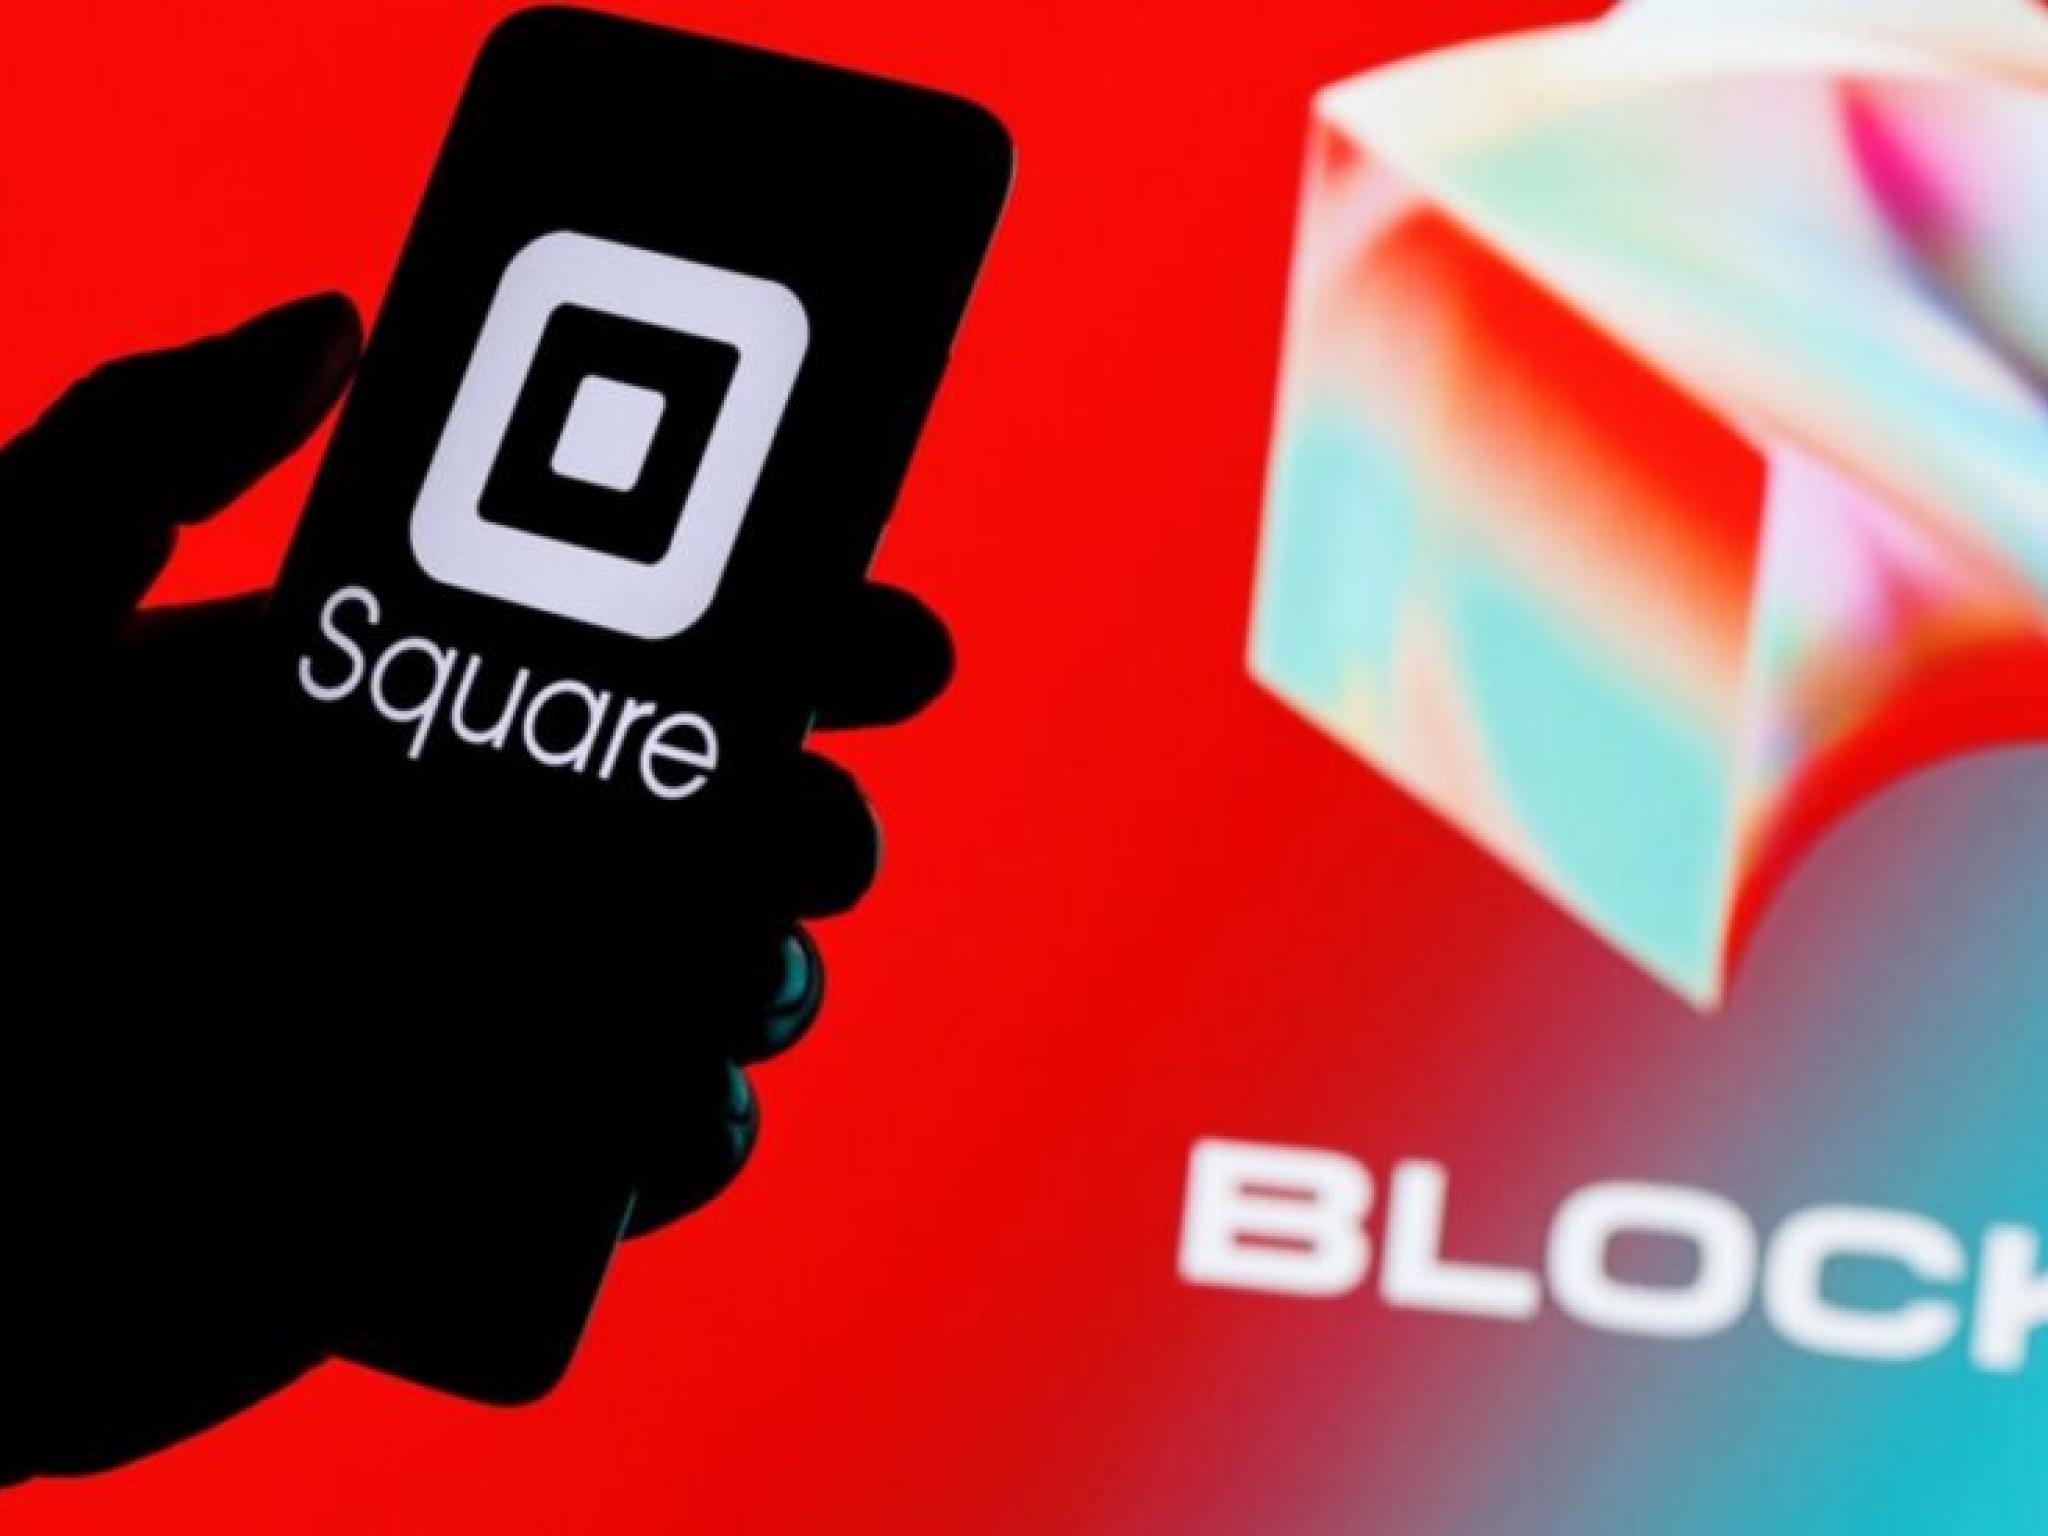  whistleblower-claims-square-processed-crypto-transactions-for-terrorists-whats-going-on-with-block-stock 